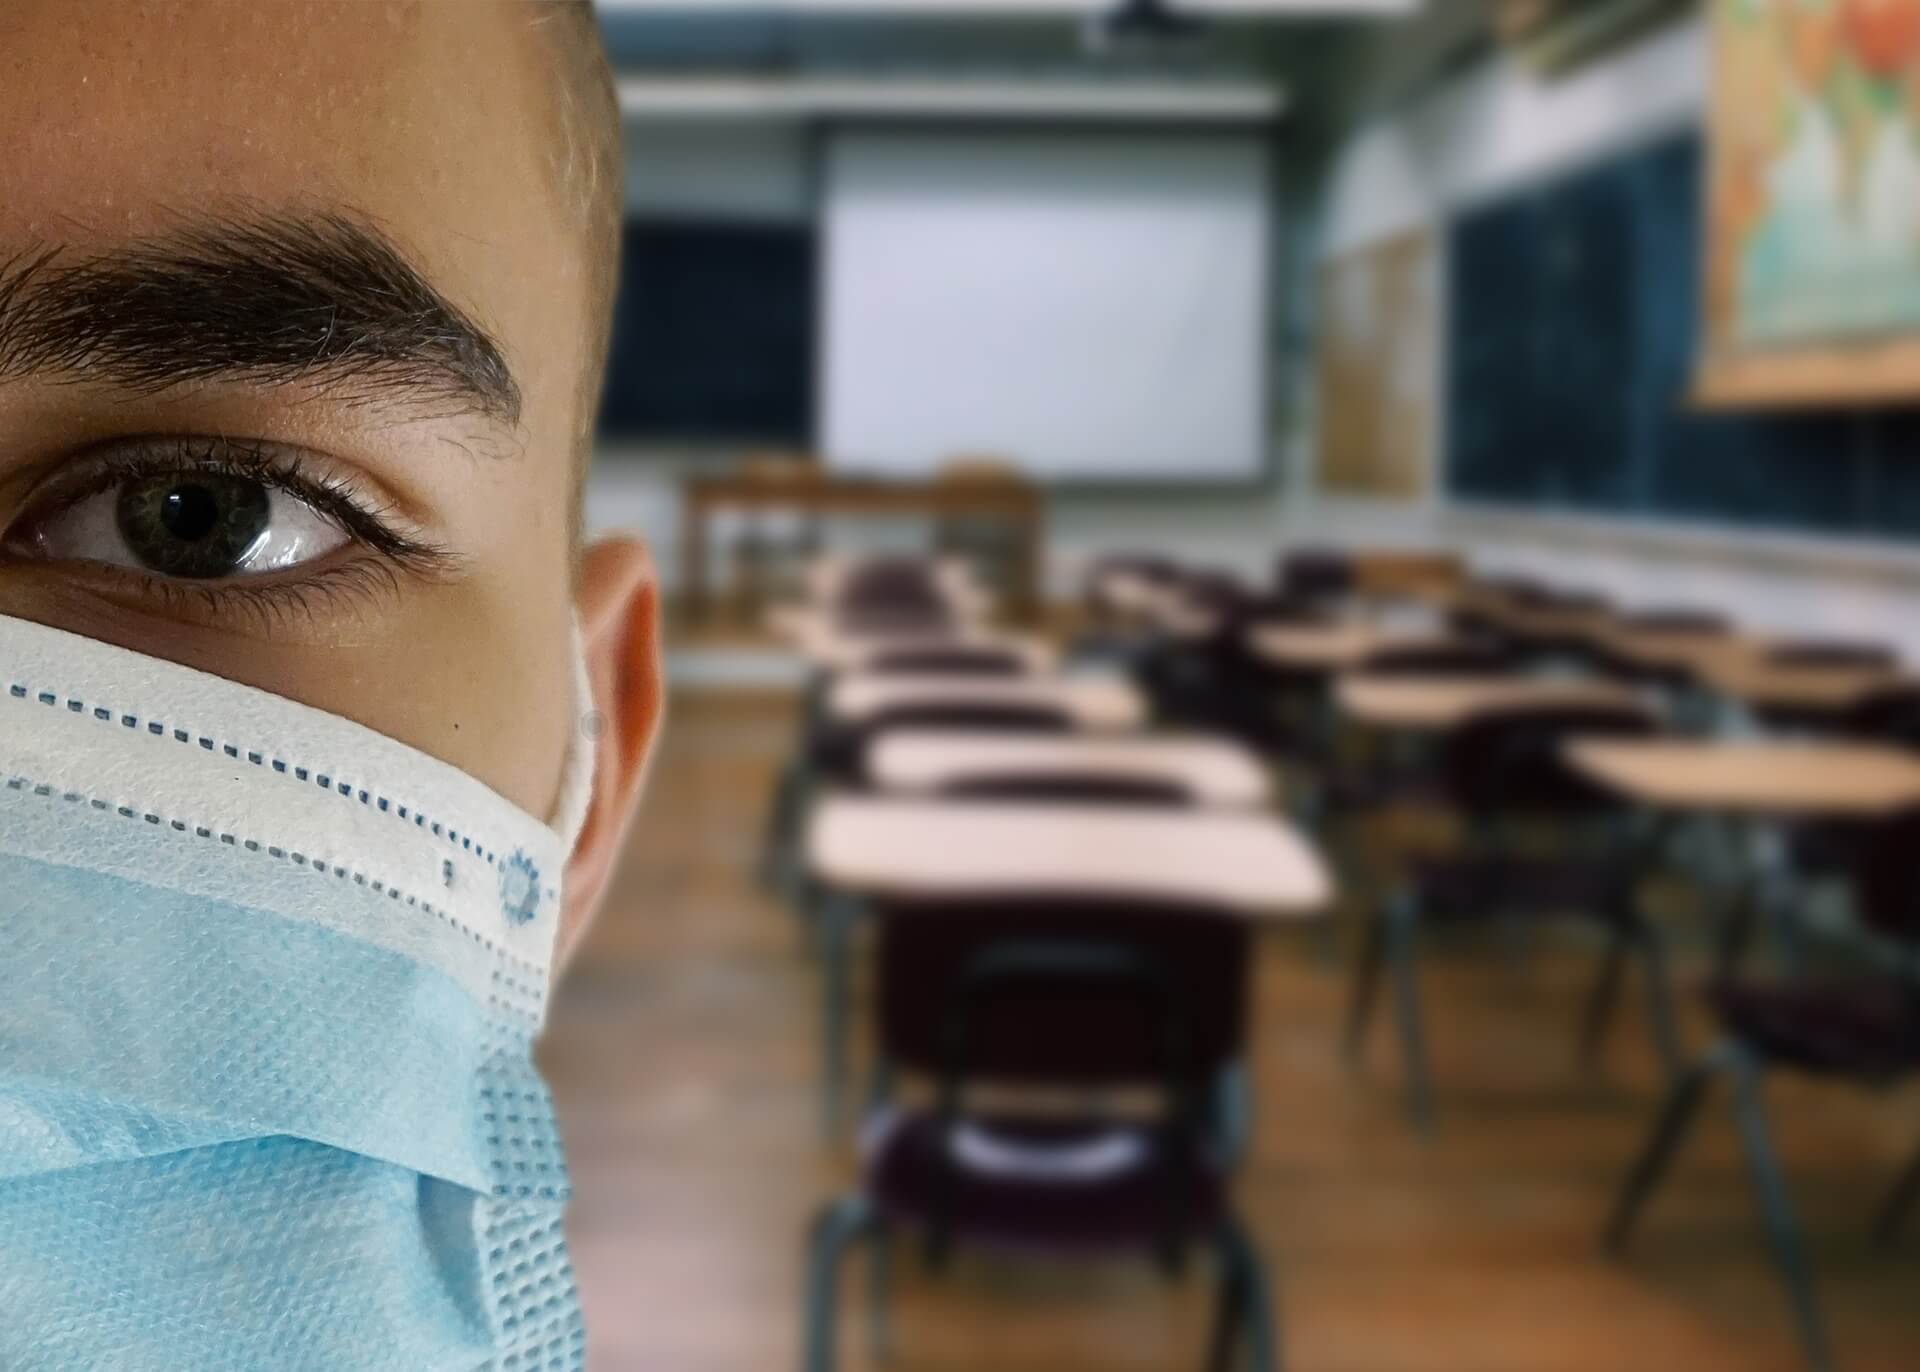 man in an empty classroom wearing a surgical mask like those worn during the coronavirus pandemic